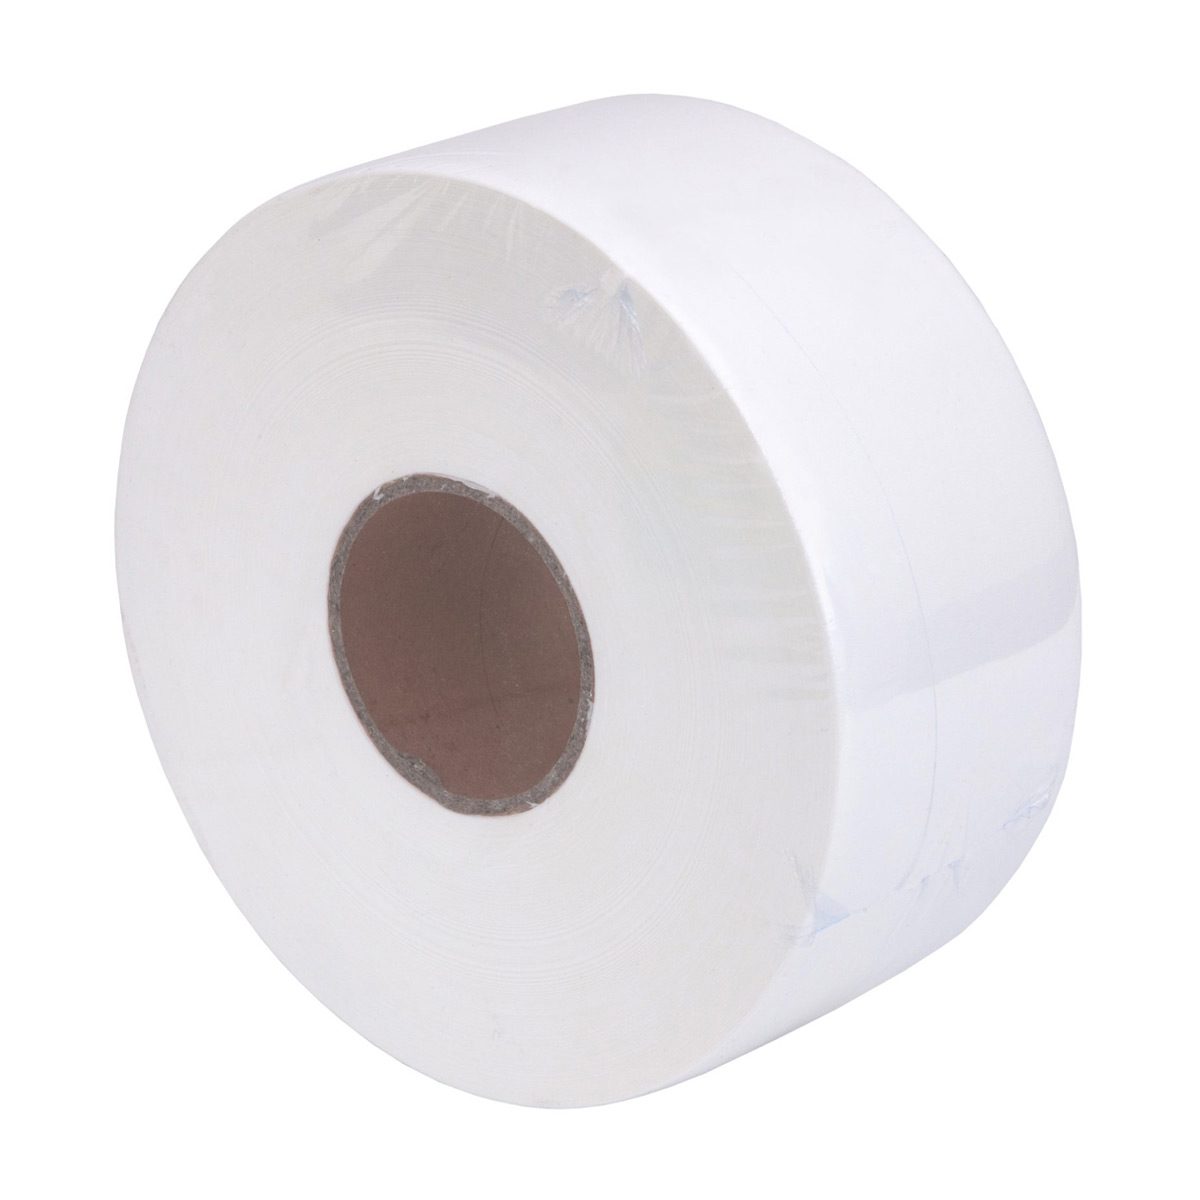 paper-products-toilet-paper-green-recycled-2-ply-jumbo-toilet-tissue-100%-recycled-post-consumer-waste-content-quality-softness-vjs-distributors-PHGJ-2